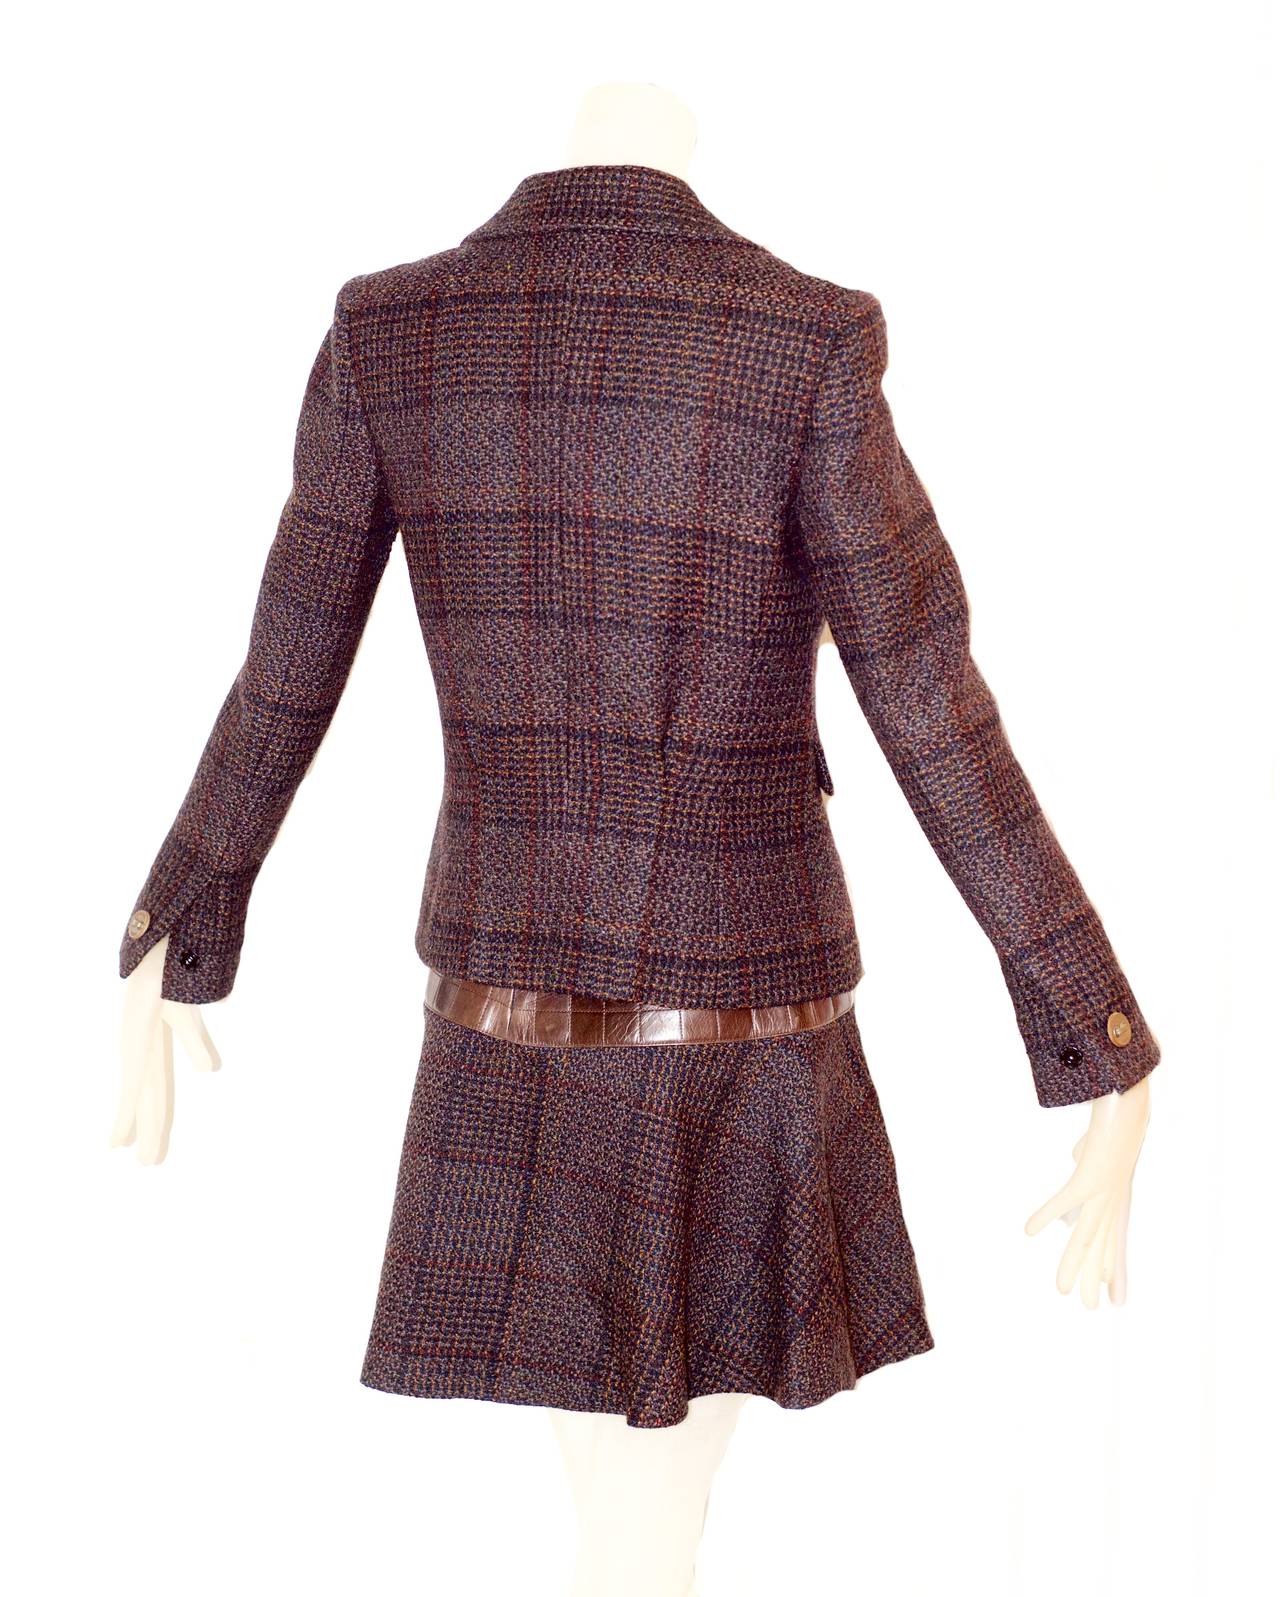 Chanel Jacket and Skirt Ensemble with Crocodile-Stamped Leather Detail In New Condition For Sale In New York, NY